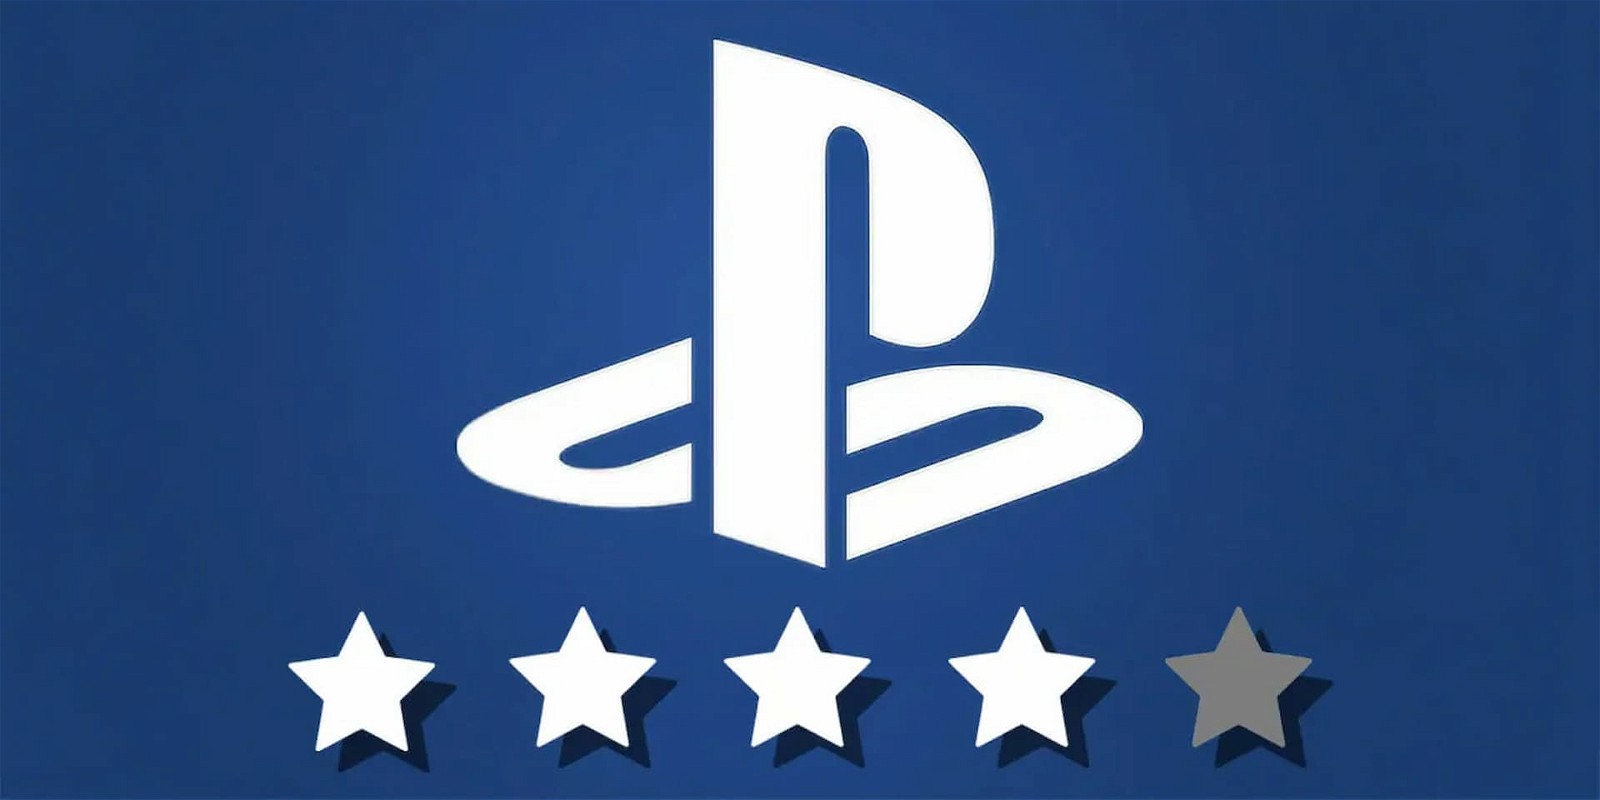 PlayStation users will now be able to rate the games they won on a scale of 1-5